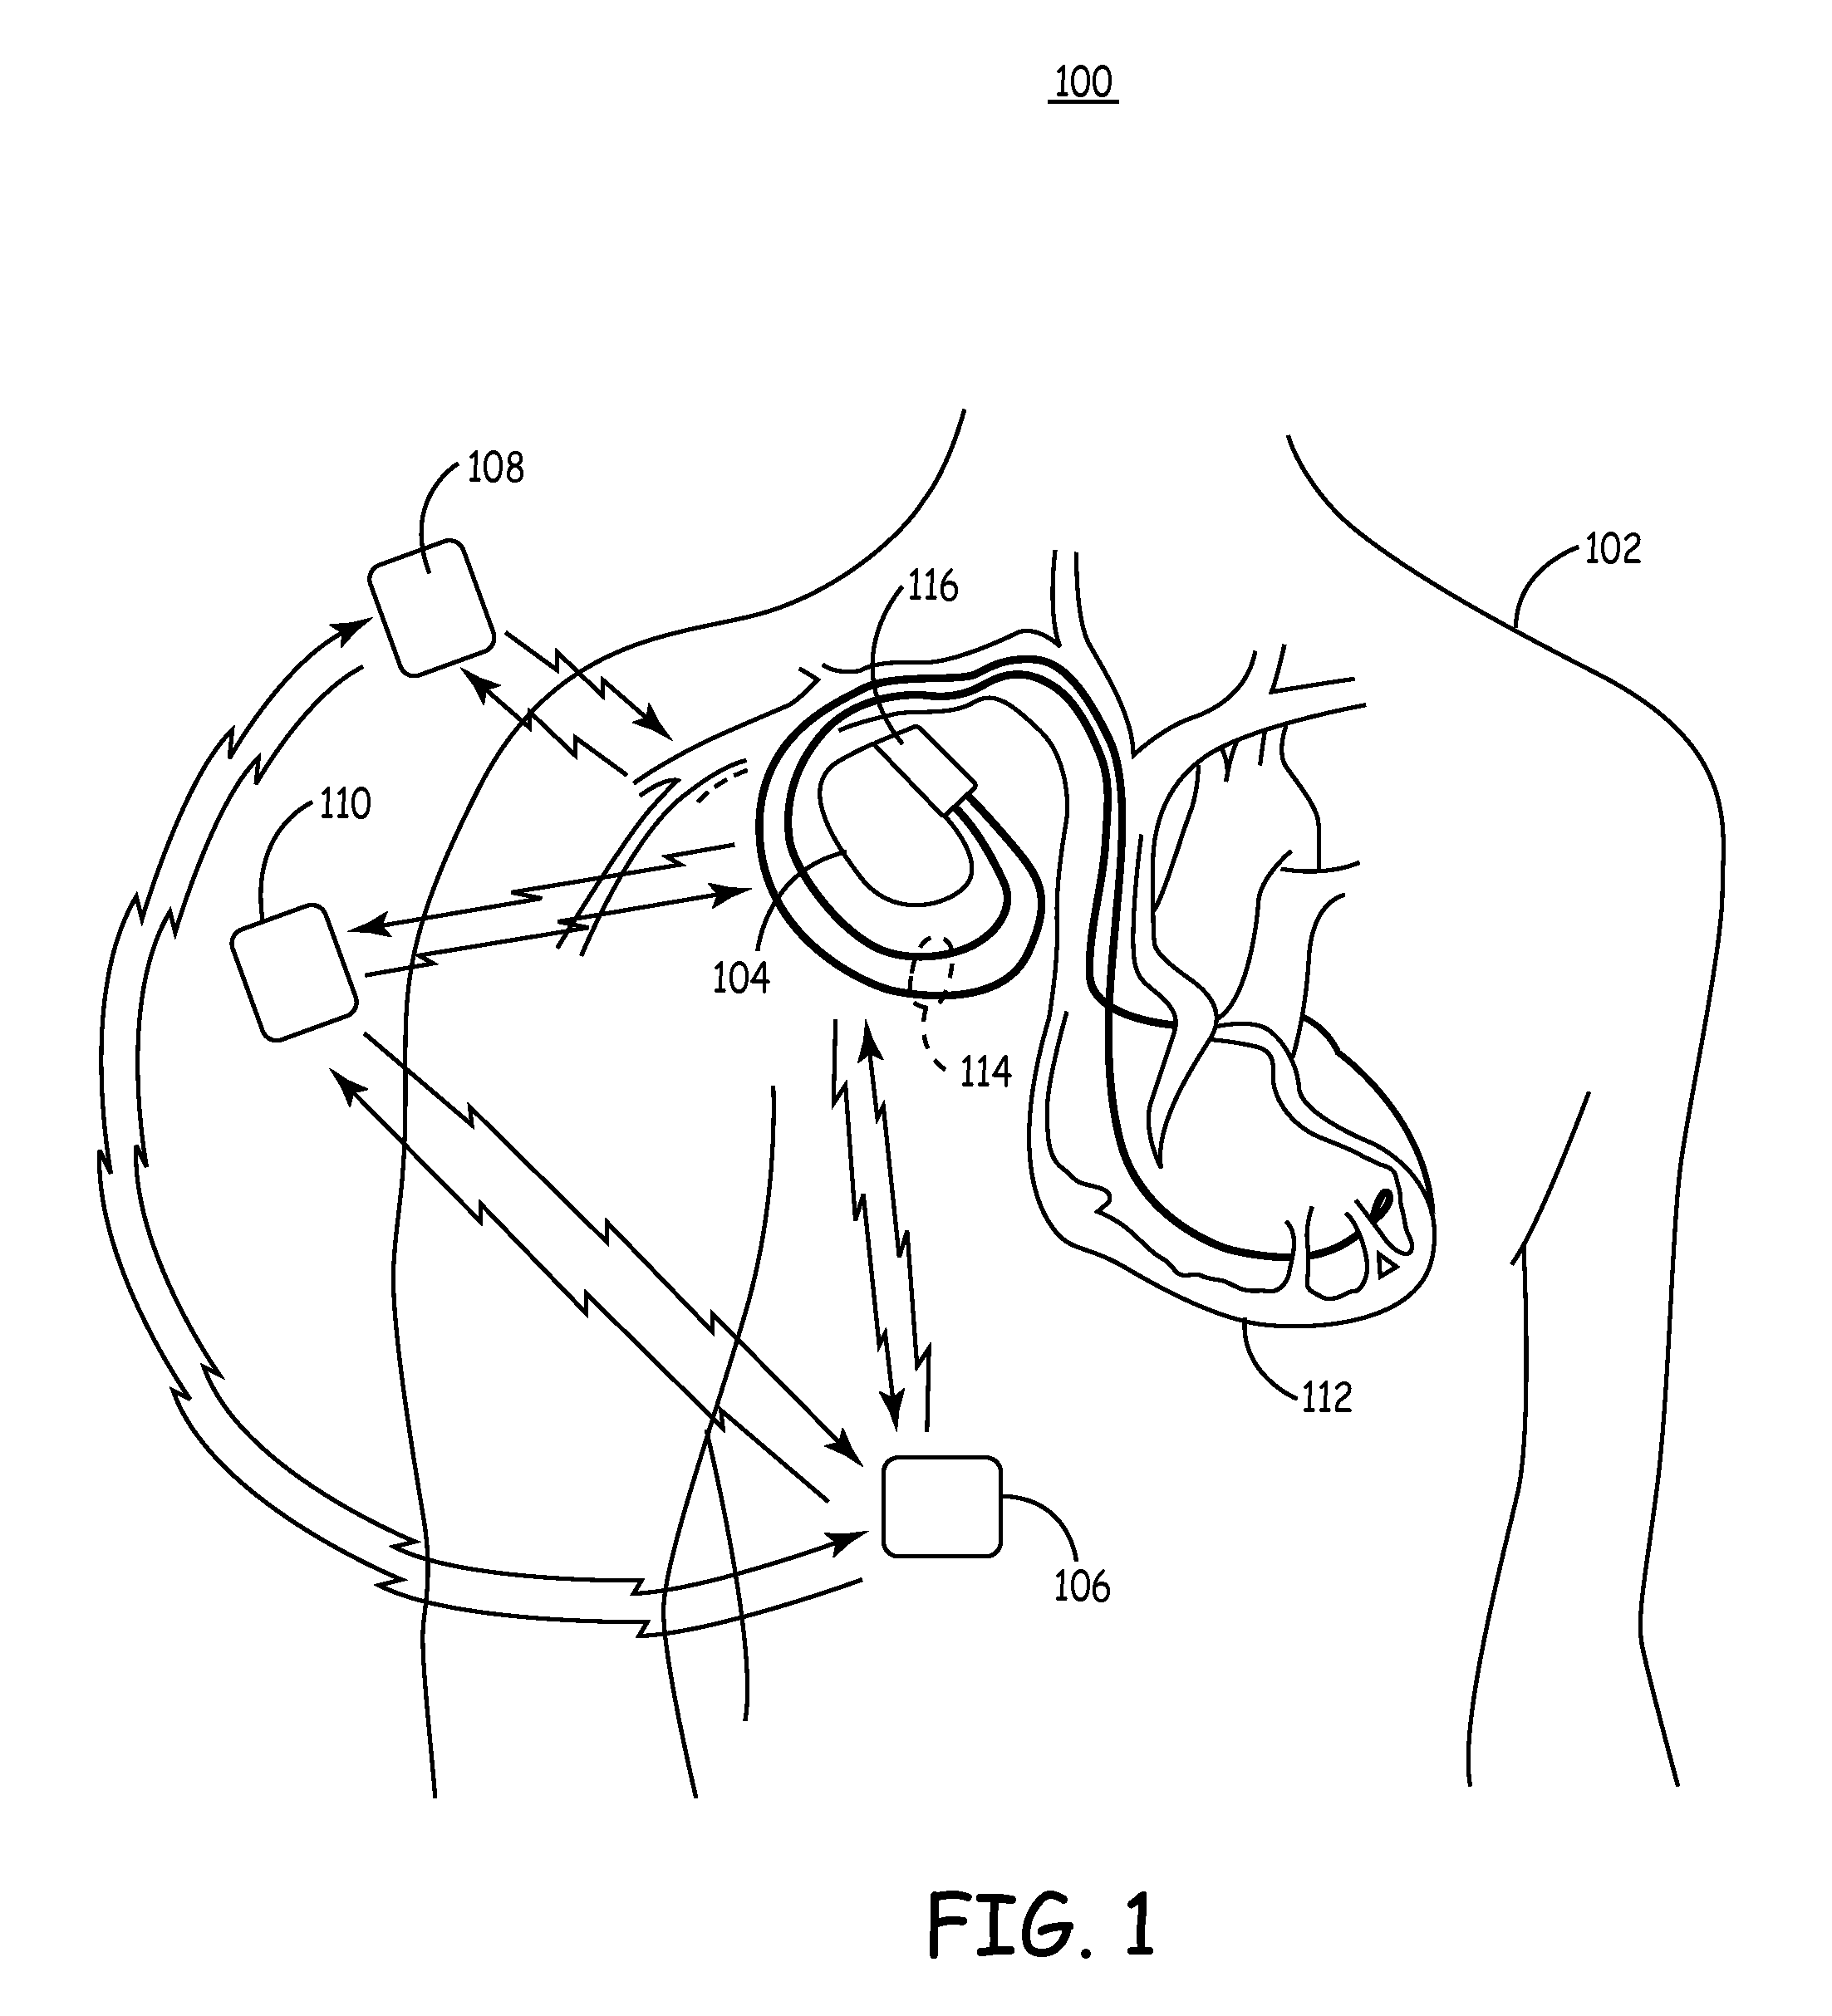 Variable implantable medical device power characteristics based upon implant depth